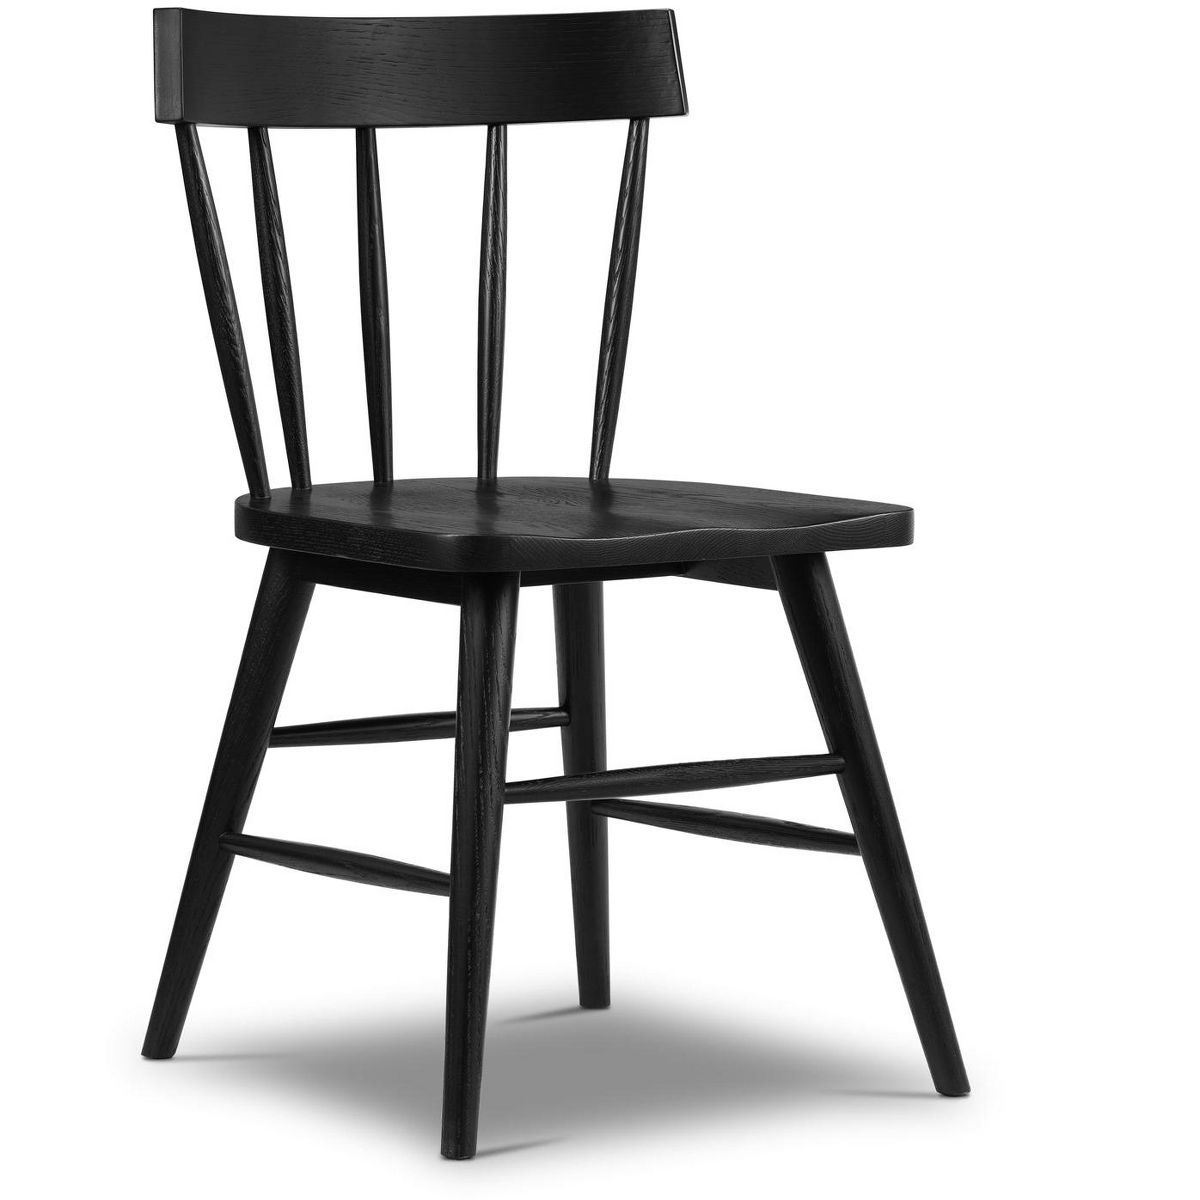 Poly & Bark Hava Dining Chair 2.0 in Black | Target